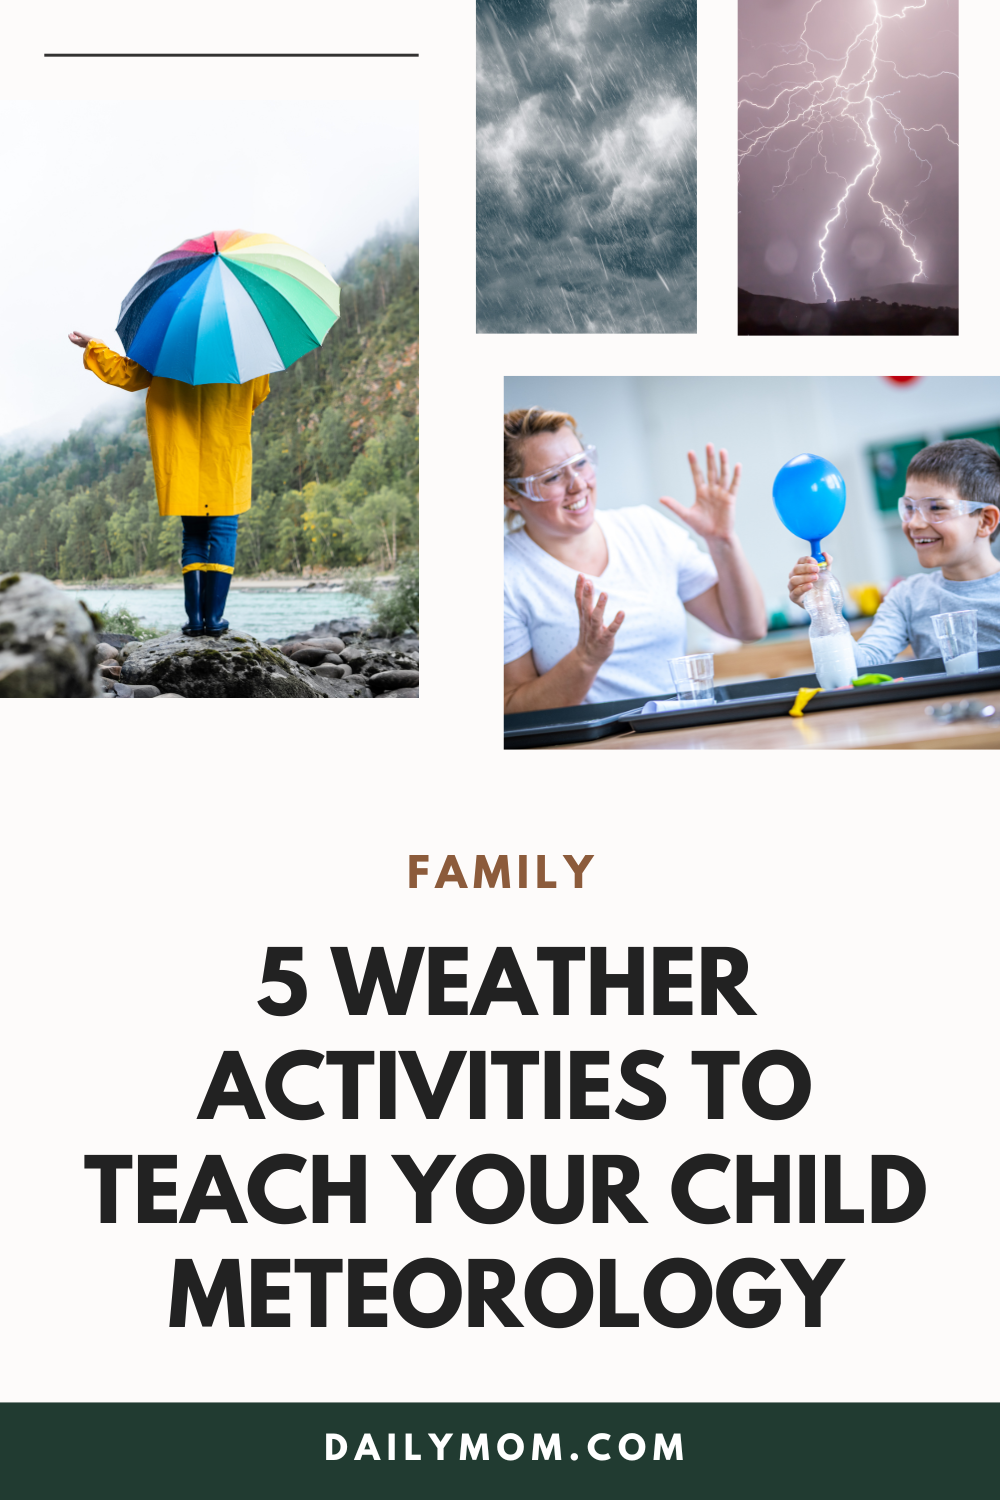 5 Weather Activities To Teach Your Child Meteorology And Explore The Great Outdoors